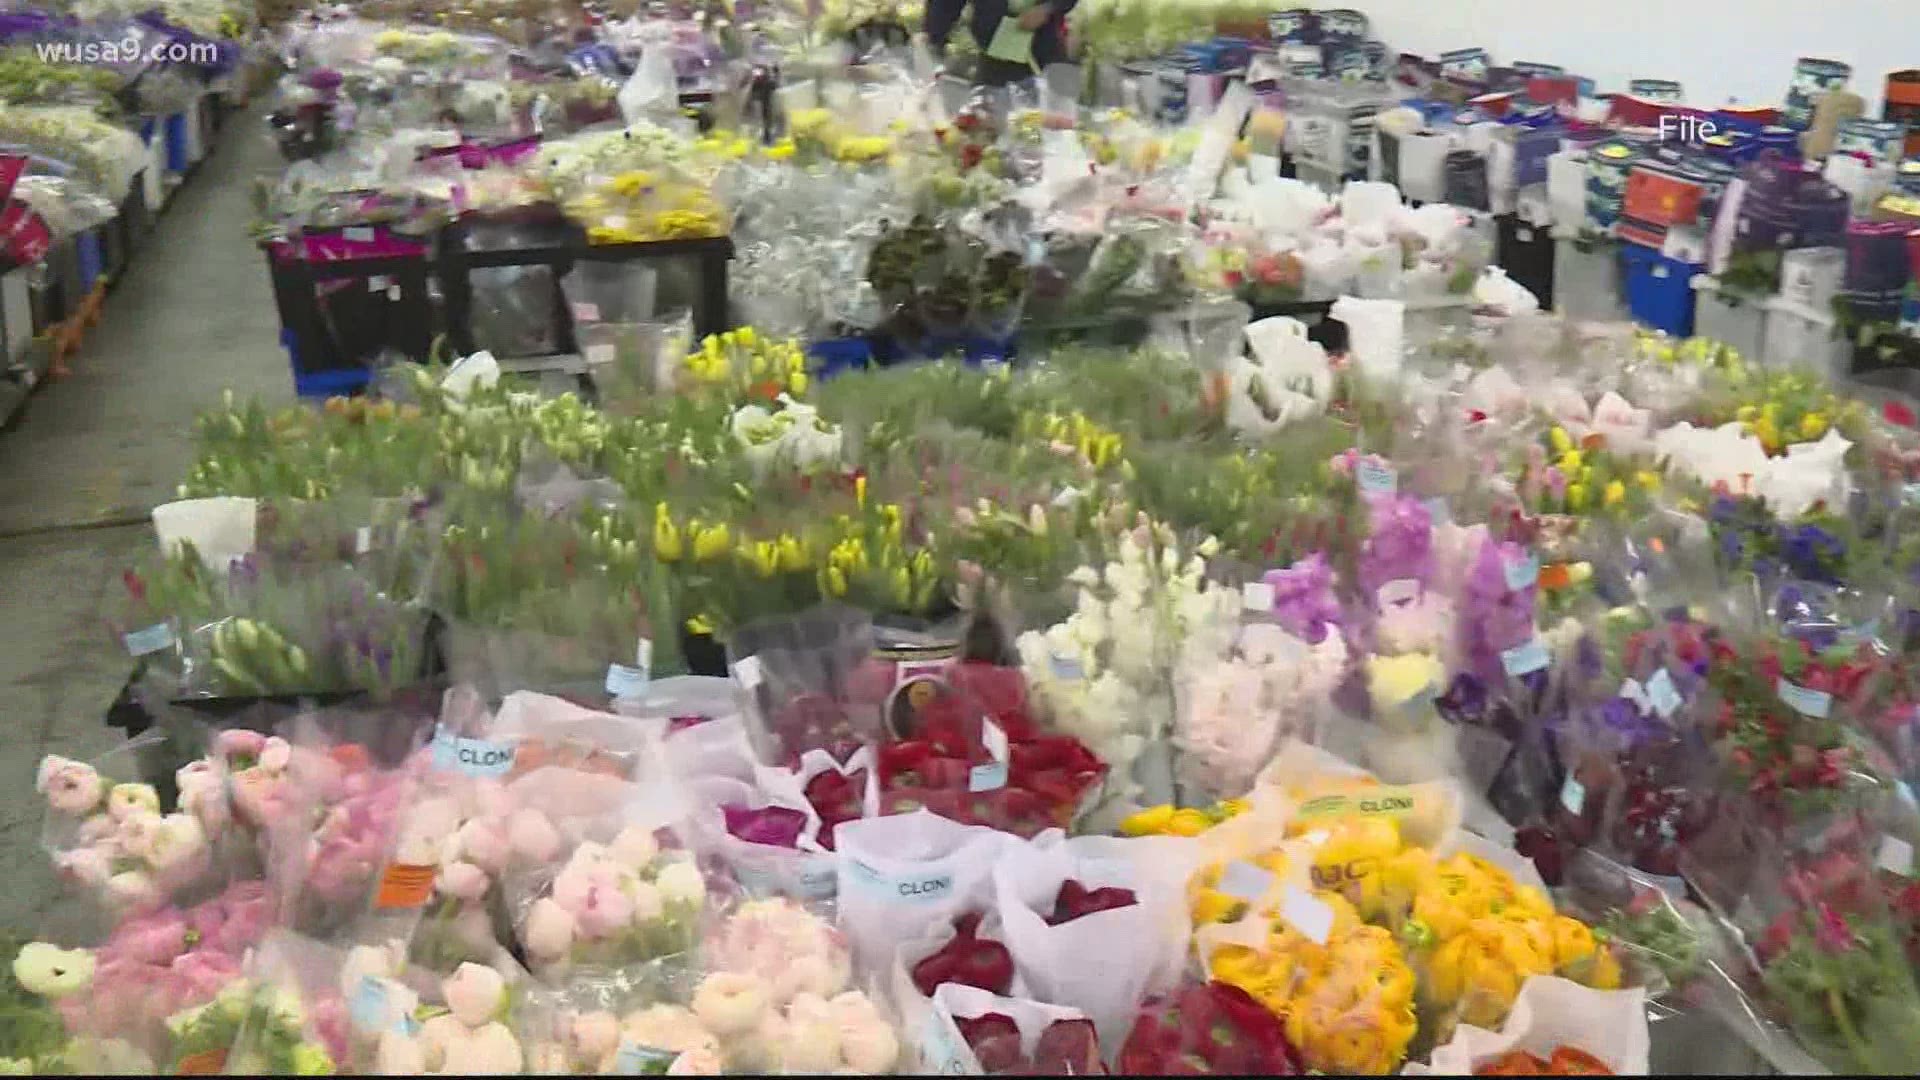 Many florist shops shut down in the DMV as the coronavirus started its spread throughout the region.